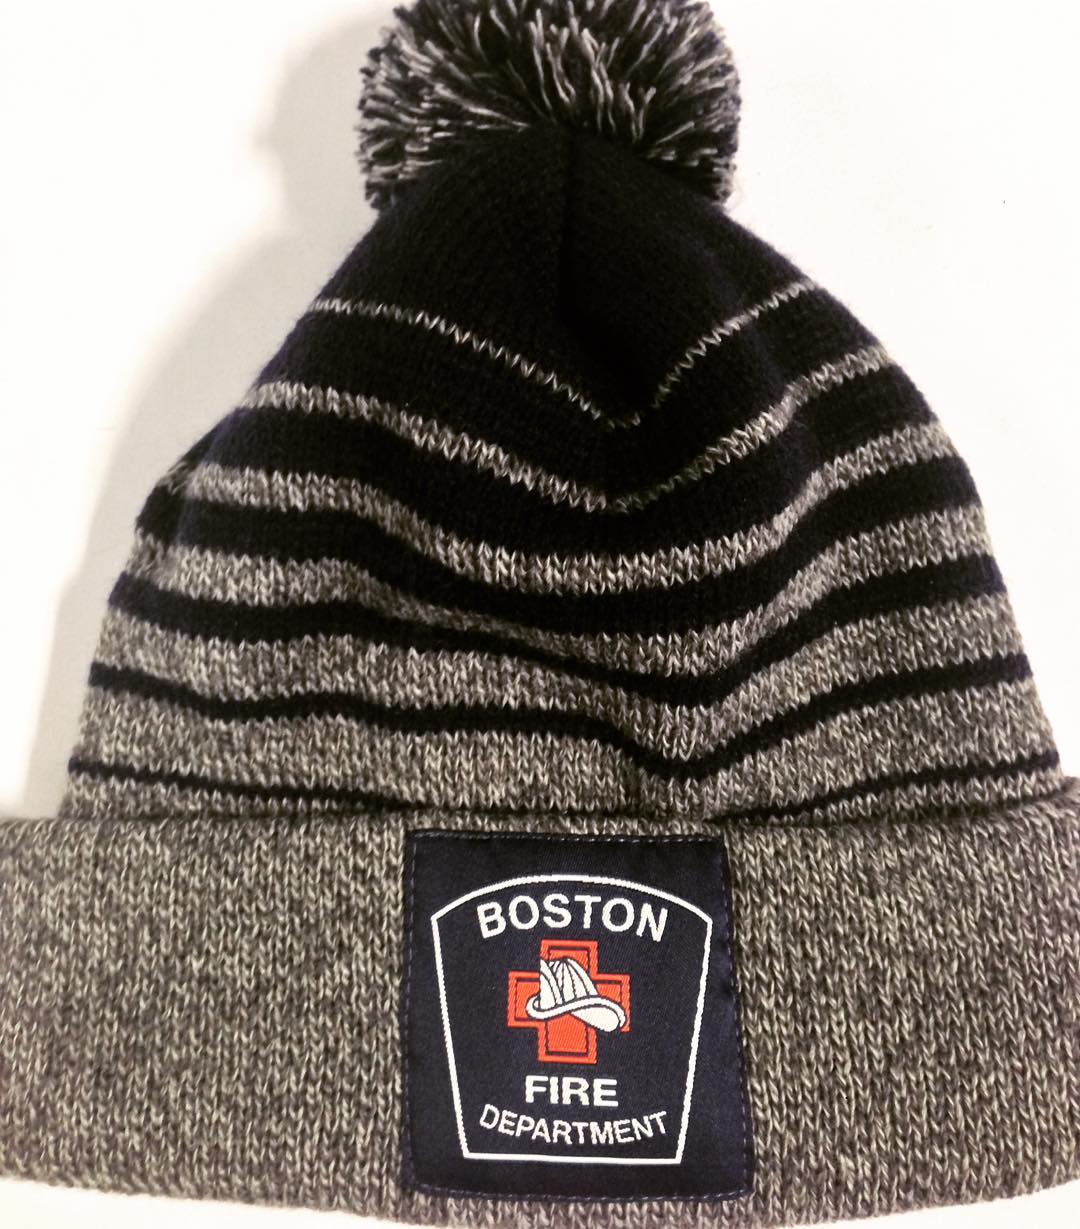 New delivery of Boston Fire beanies just in! Four in the store and more ...